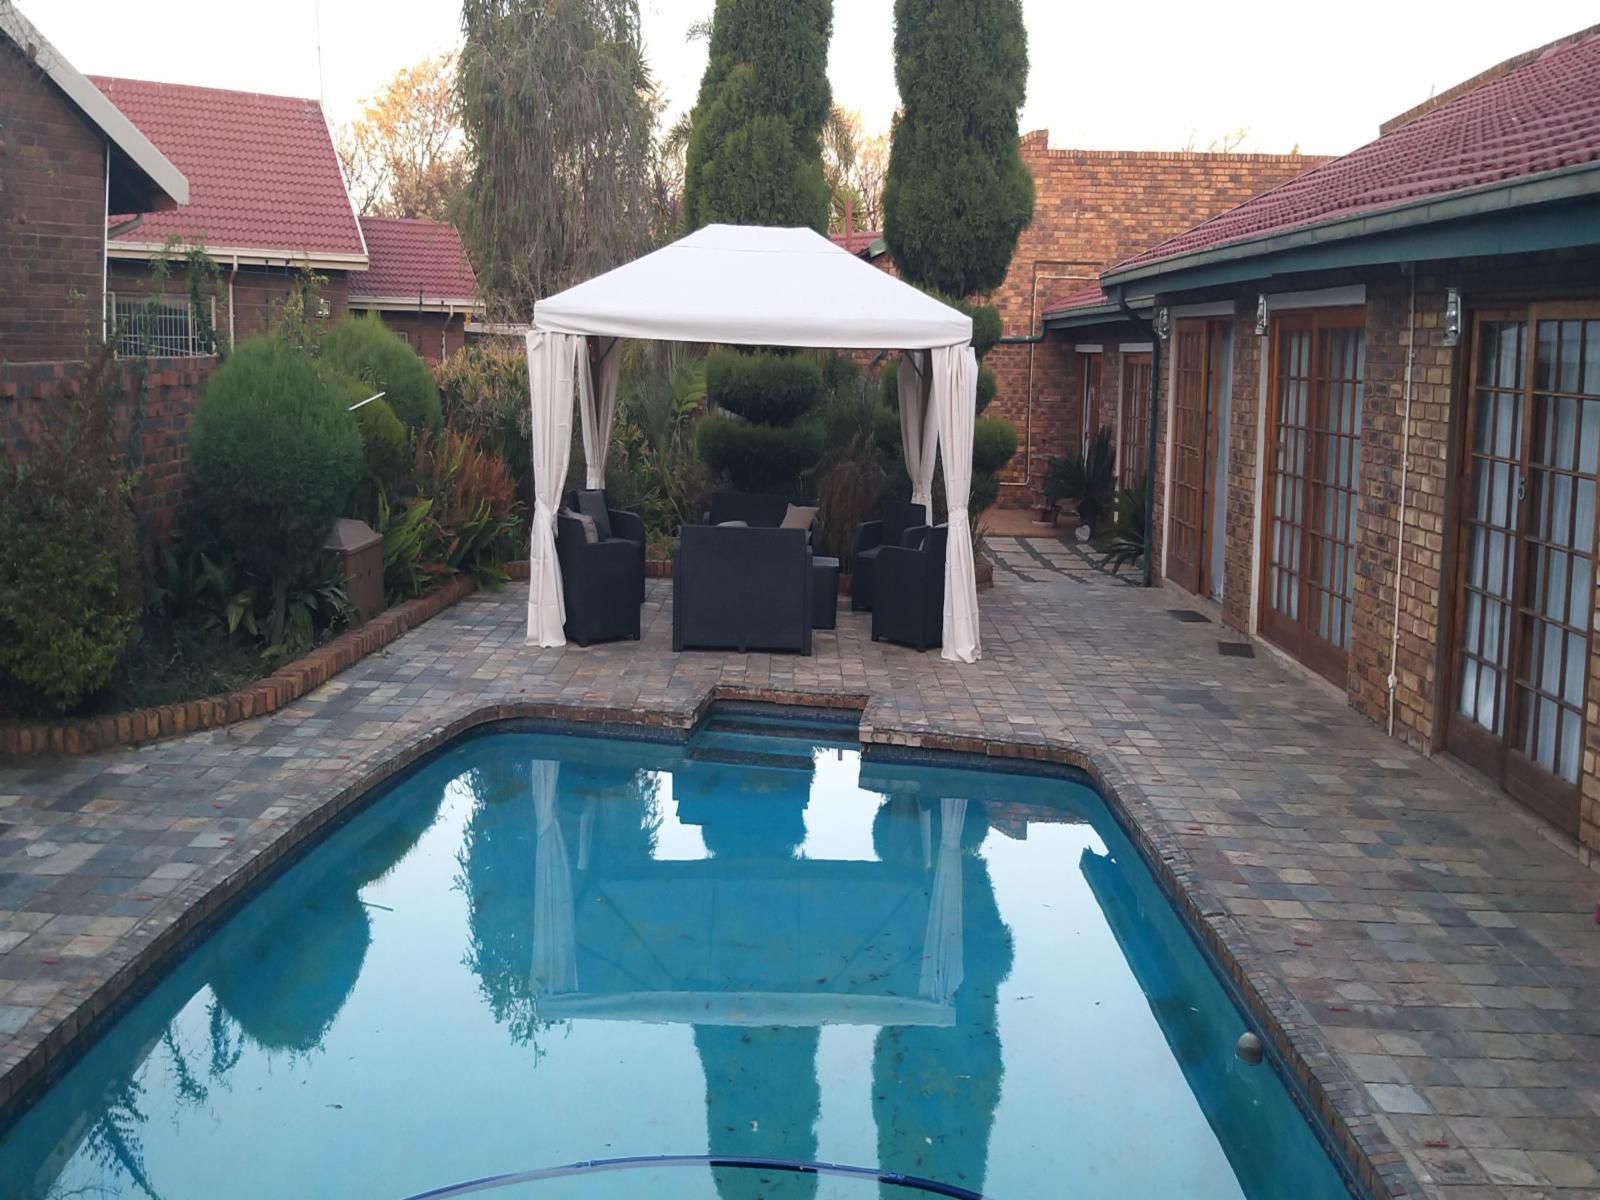 Thabong Guesthouse Carnival City Brakpan Gauteng South Africa House, Building, Architecture, Swimming Pool